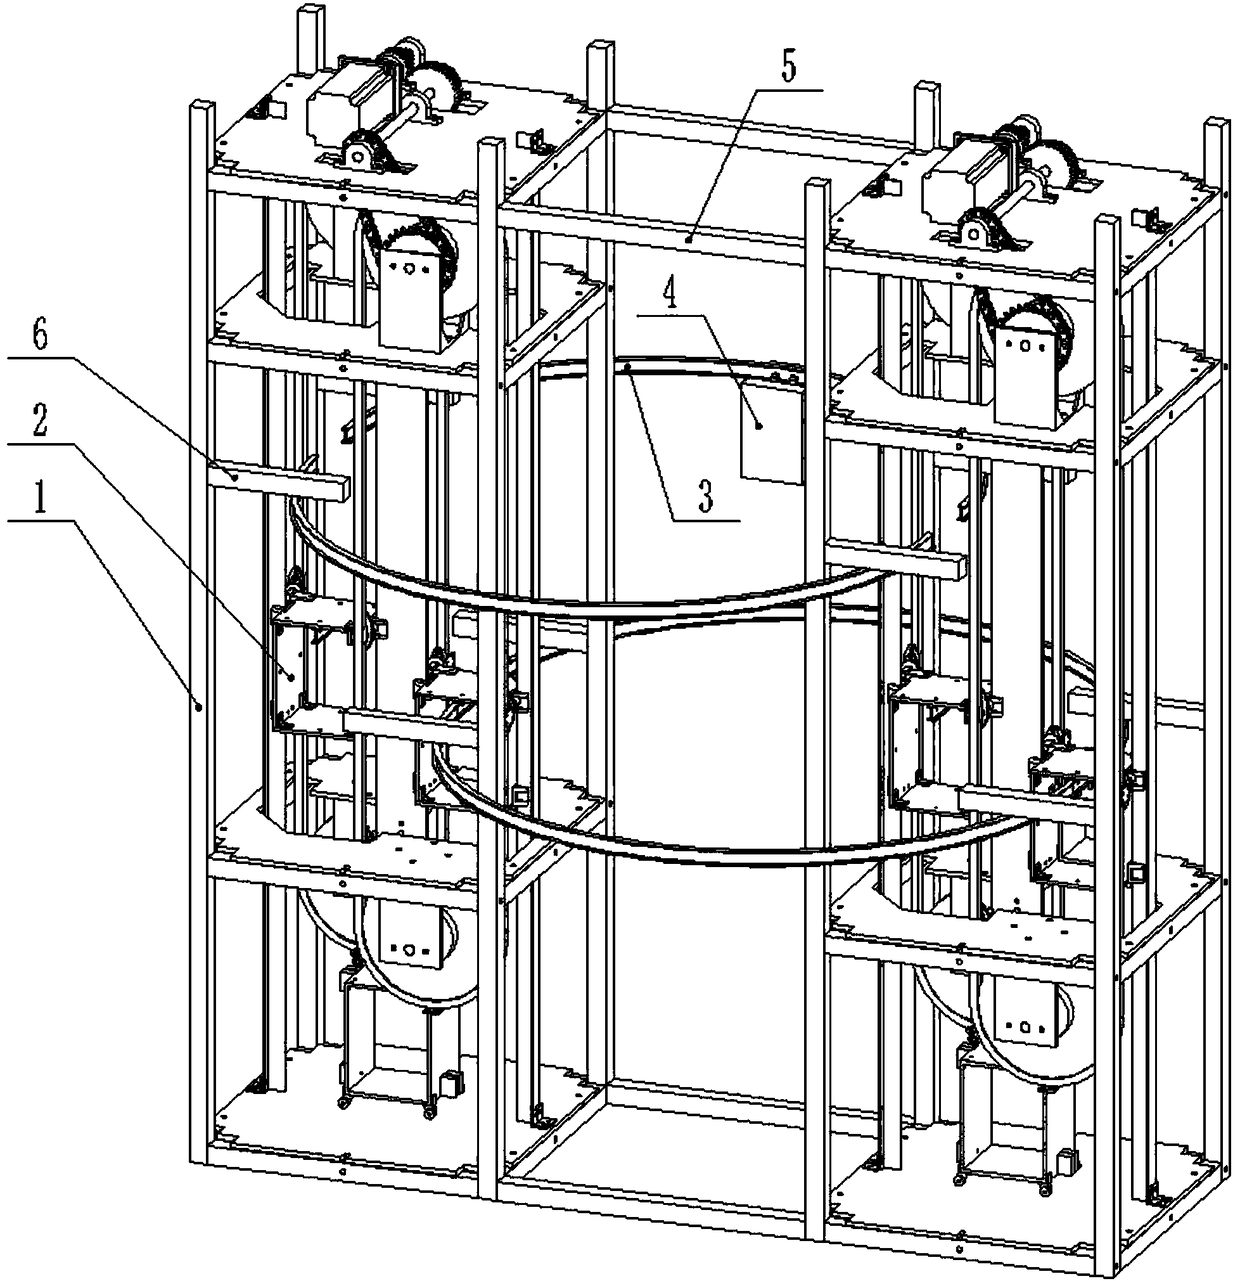 Elevator capable of realizing vertical and horizontal cycle operation